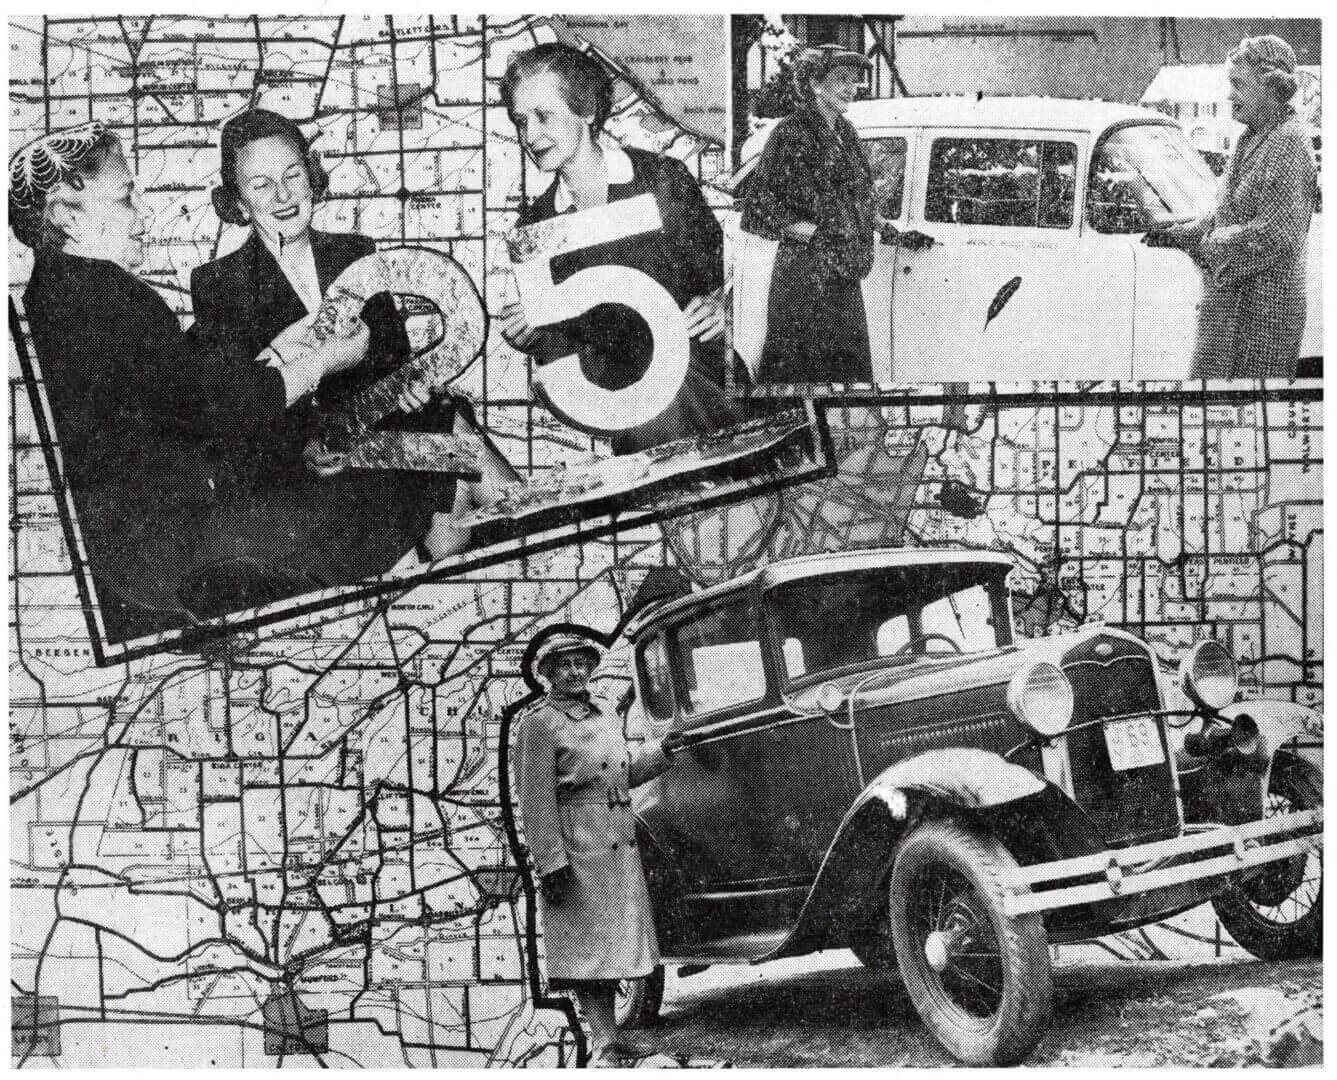 A collage of old photos with a car and woman